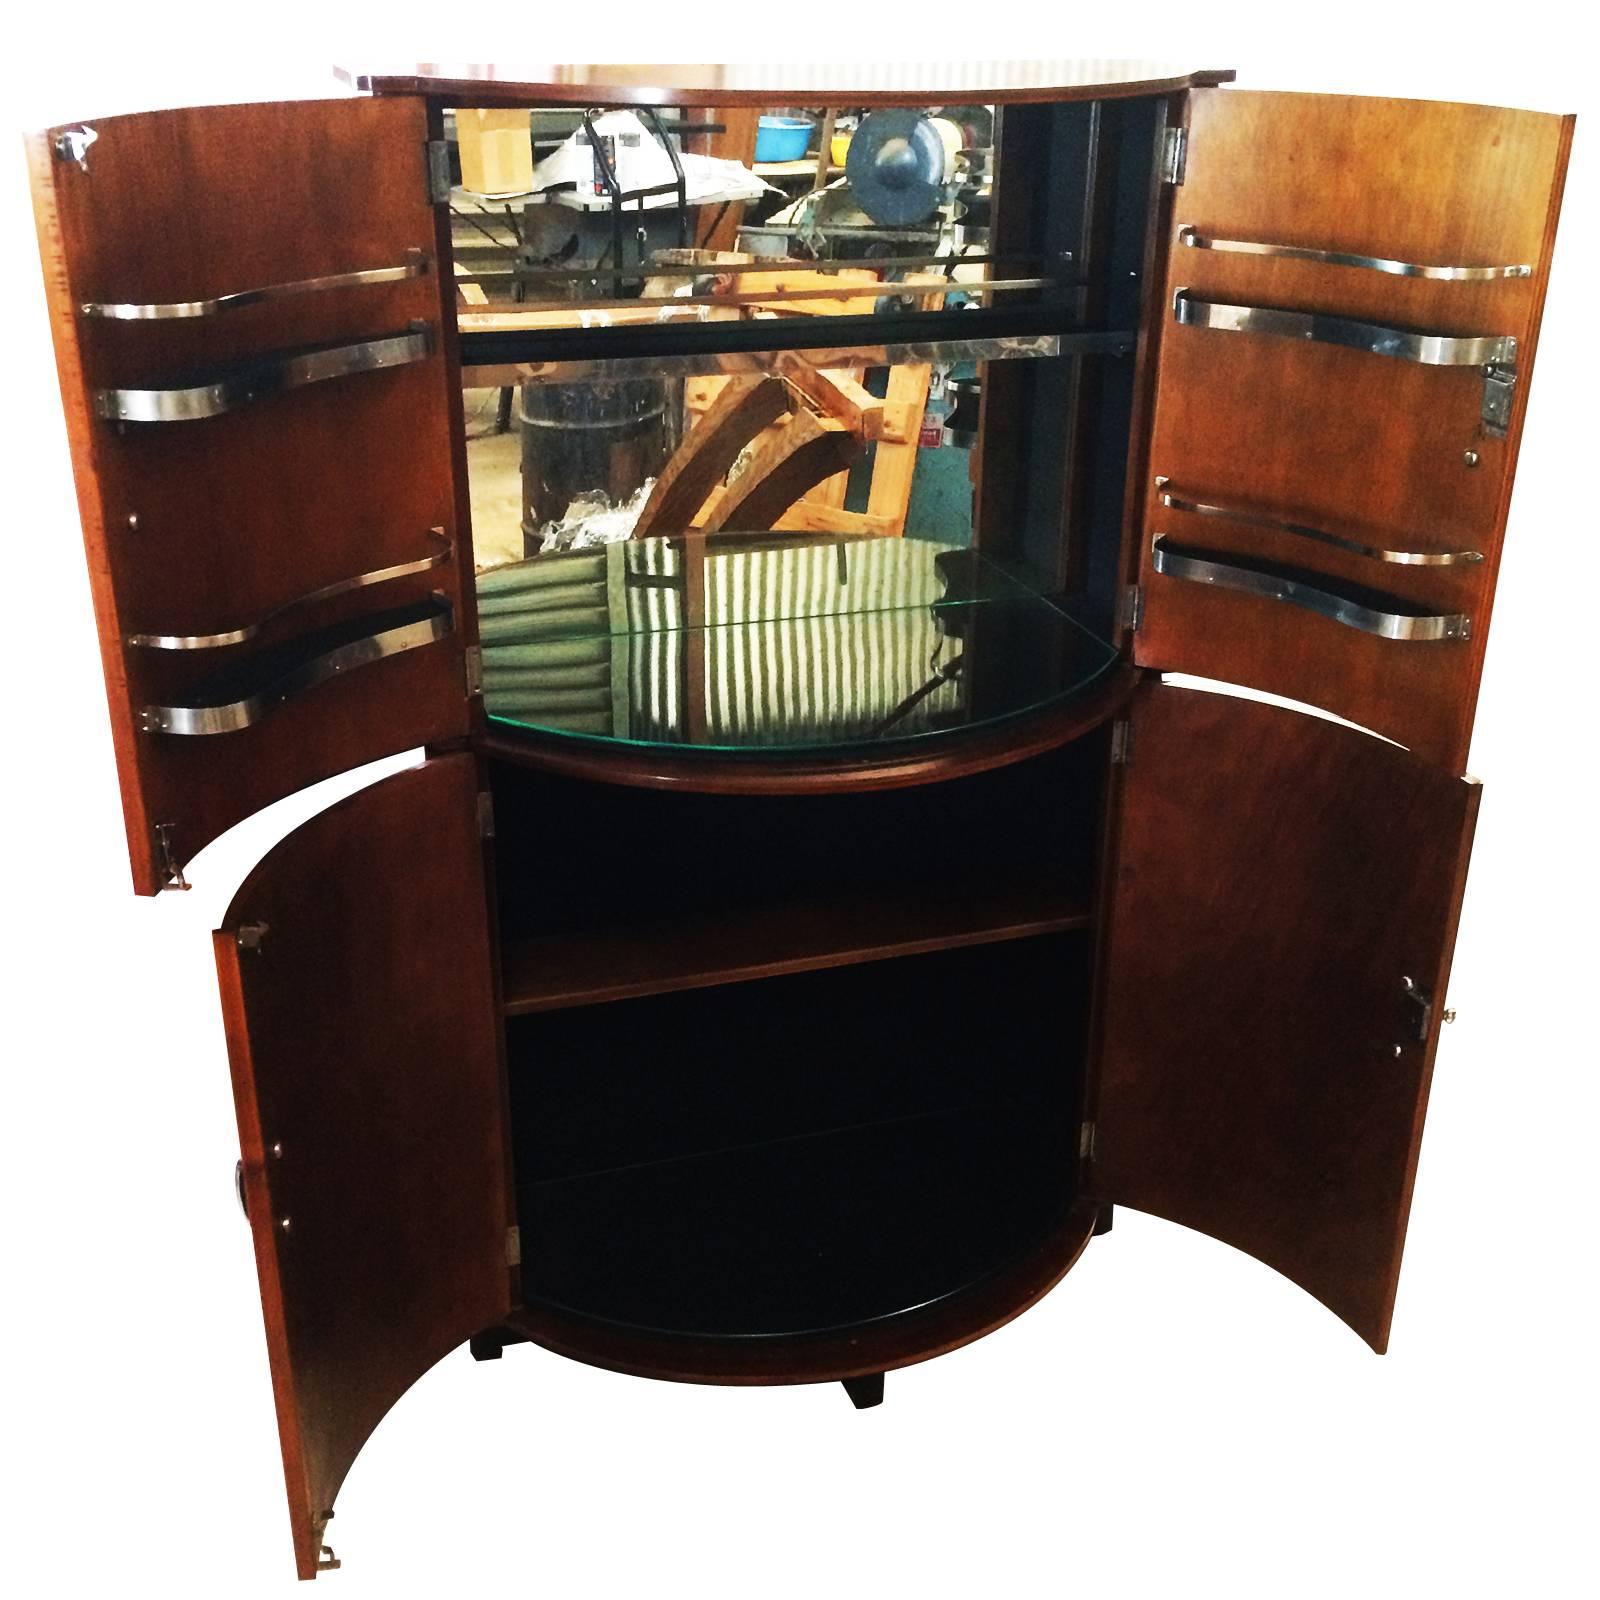 Art Deco English half round cocktail bar, drinks cabinet with a vertical rectangular rear section and a half round front with half round doors to front, the upper pair are fully fitted doors with two chromed shelves to each for glasses, and a